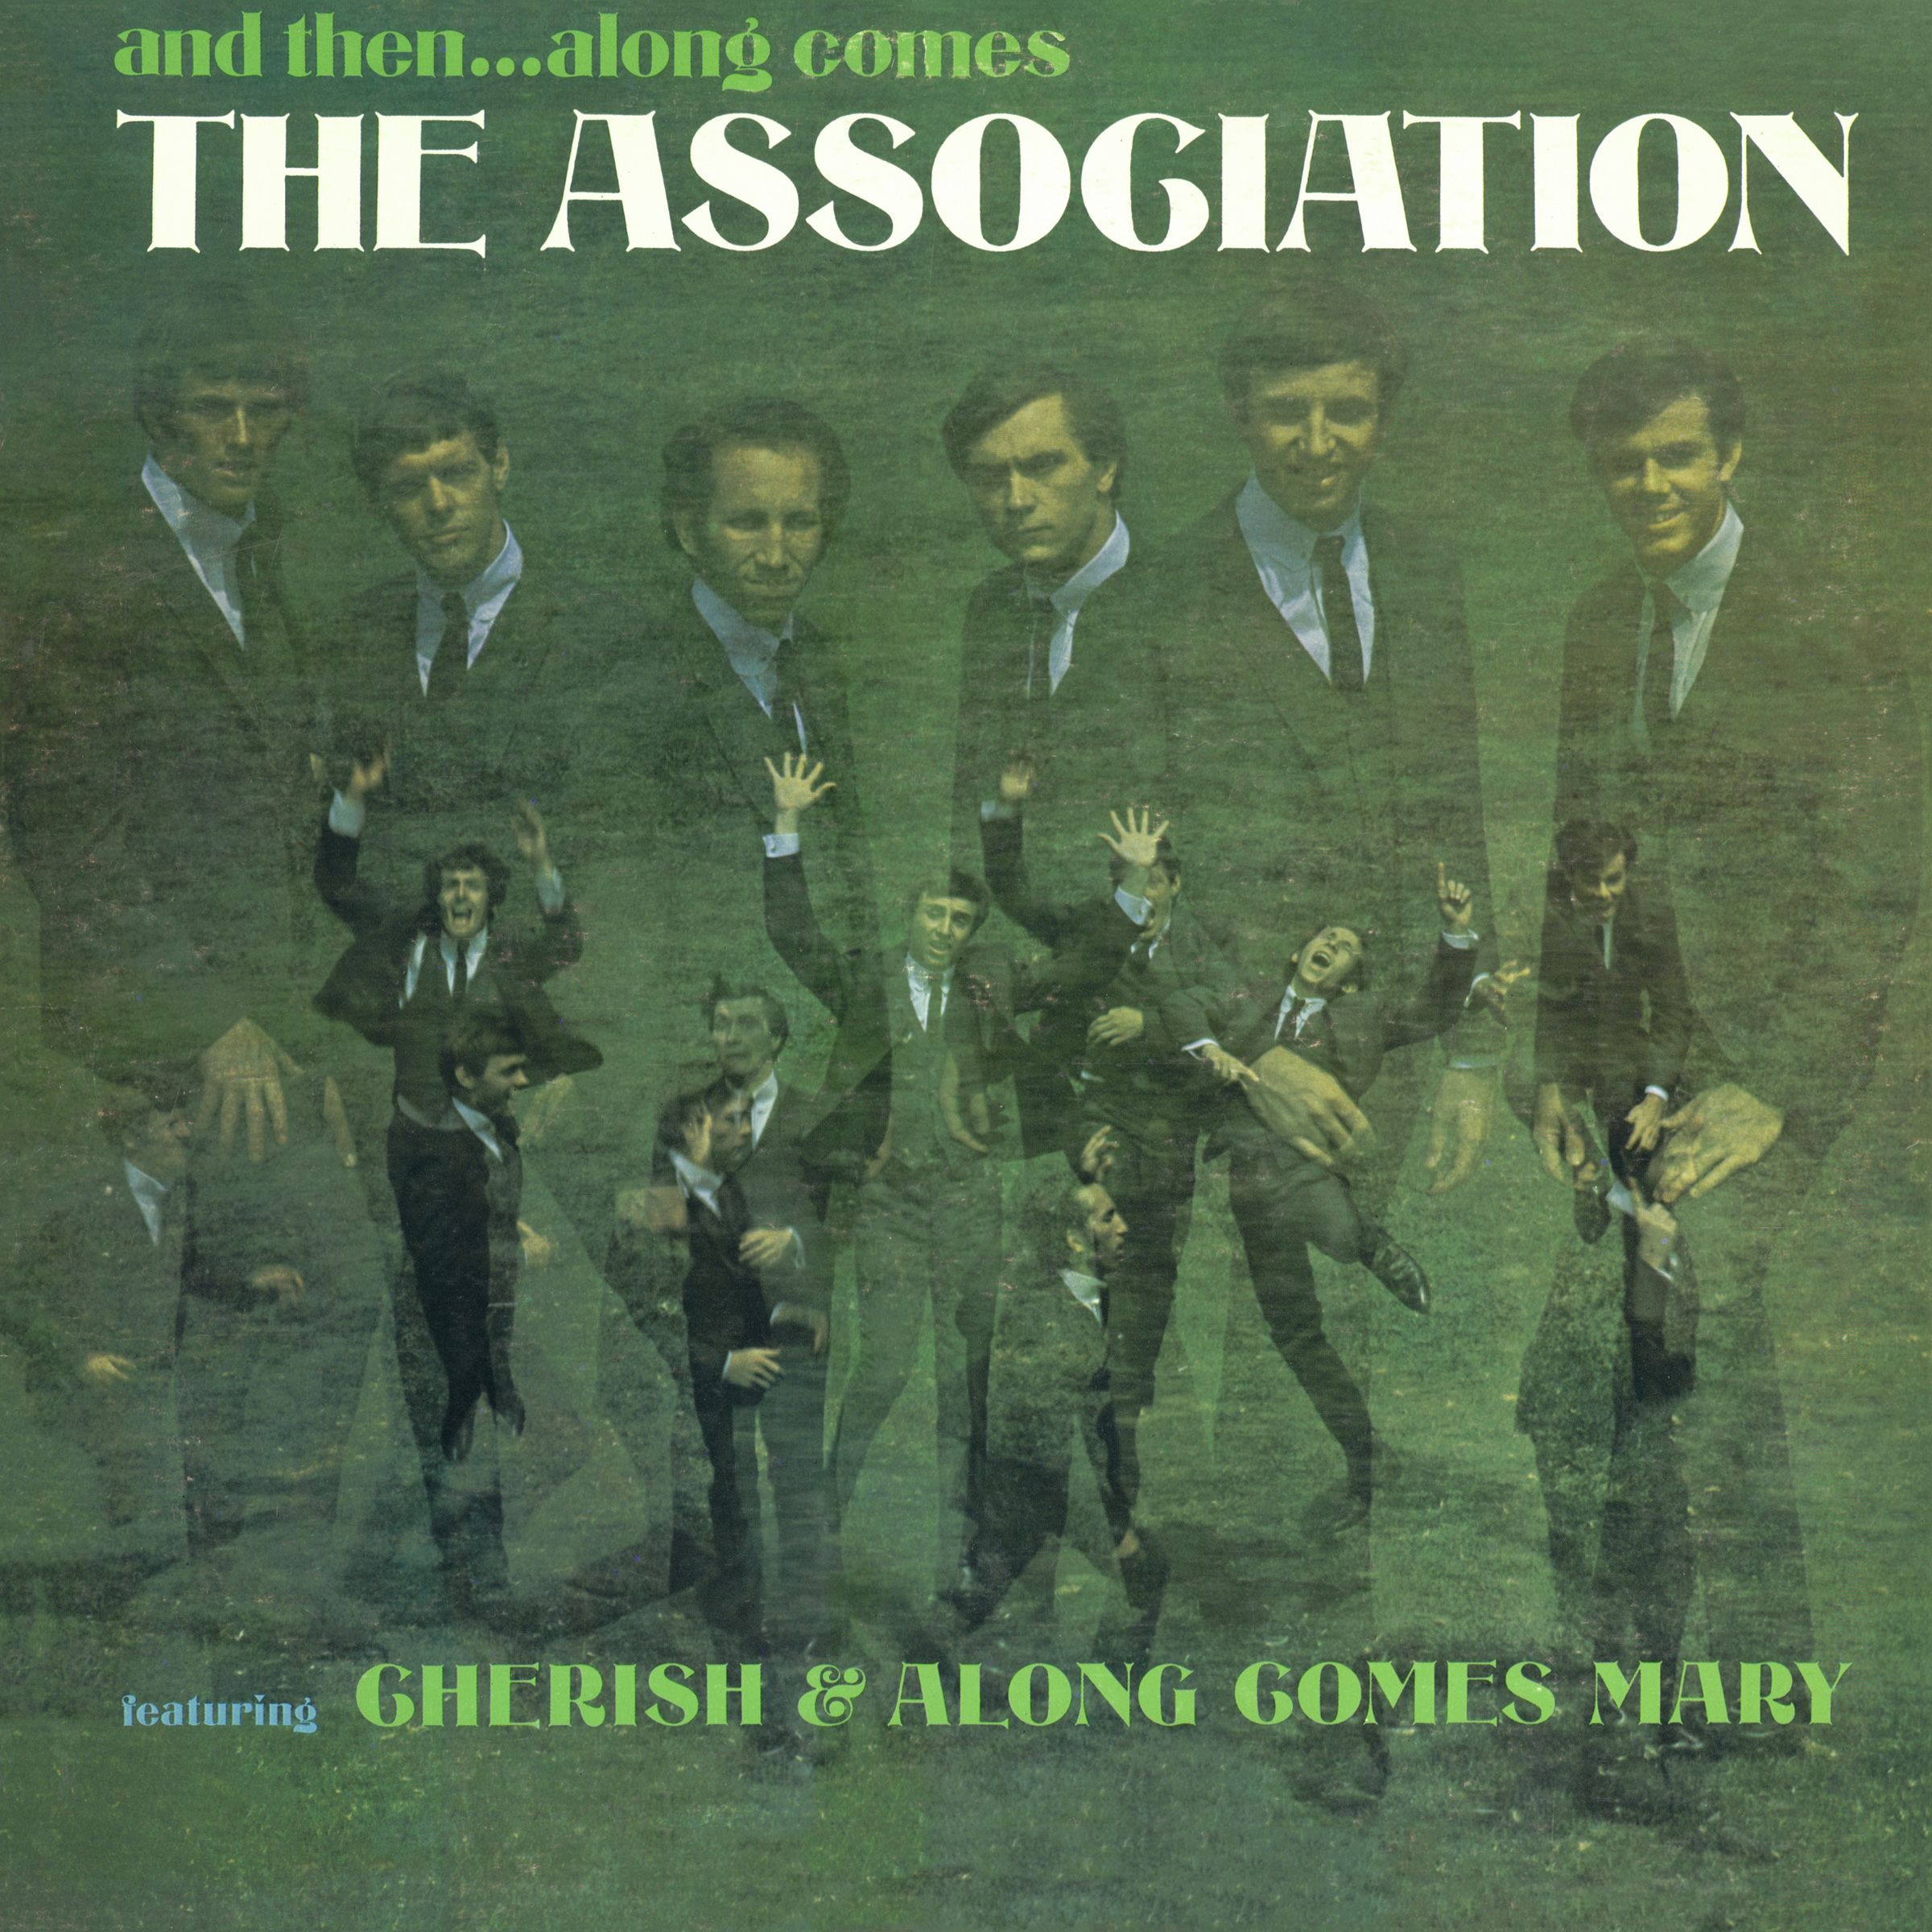 The Association - And Then… Along Comes The Association (1966/2017) [HDTracks FLAC 24bit/192kHz]